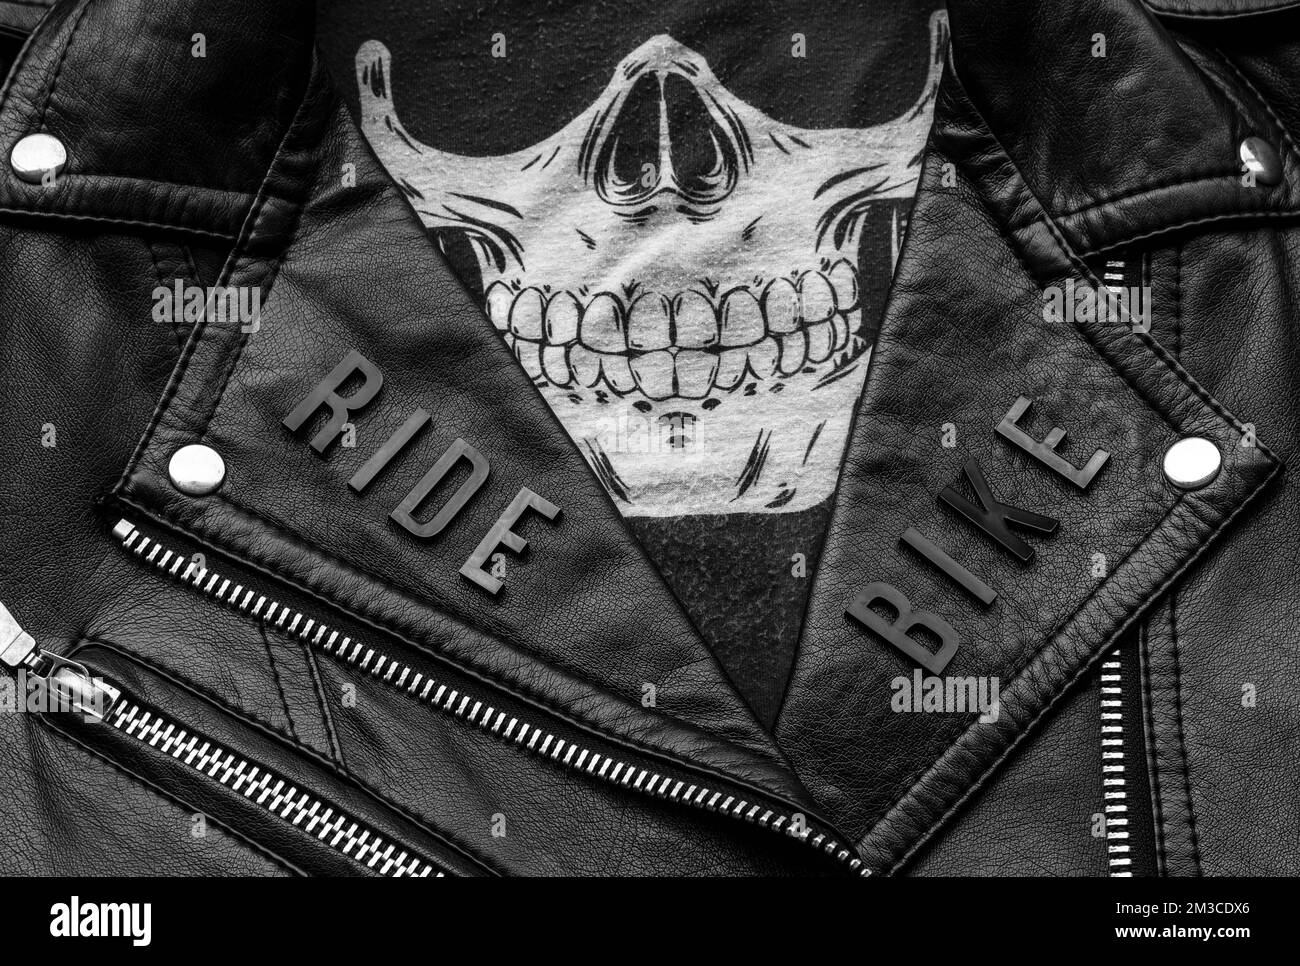 closeup to ride bike lettering over biker leather jacket and skull kerchief. motorcycle style, black and white photography Stock Photo